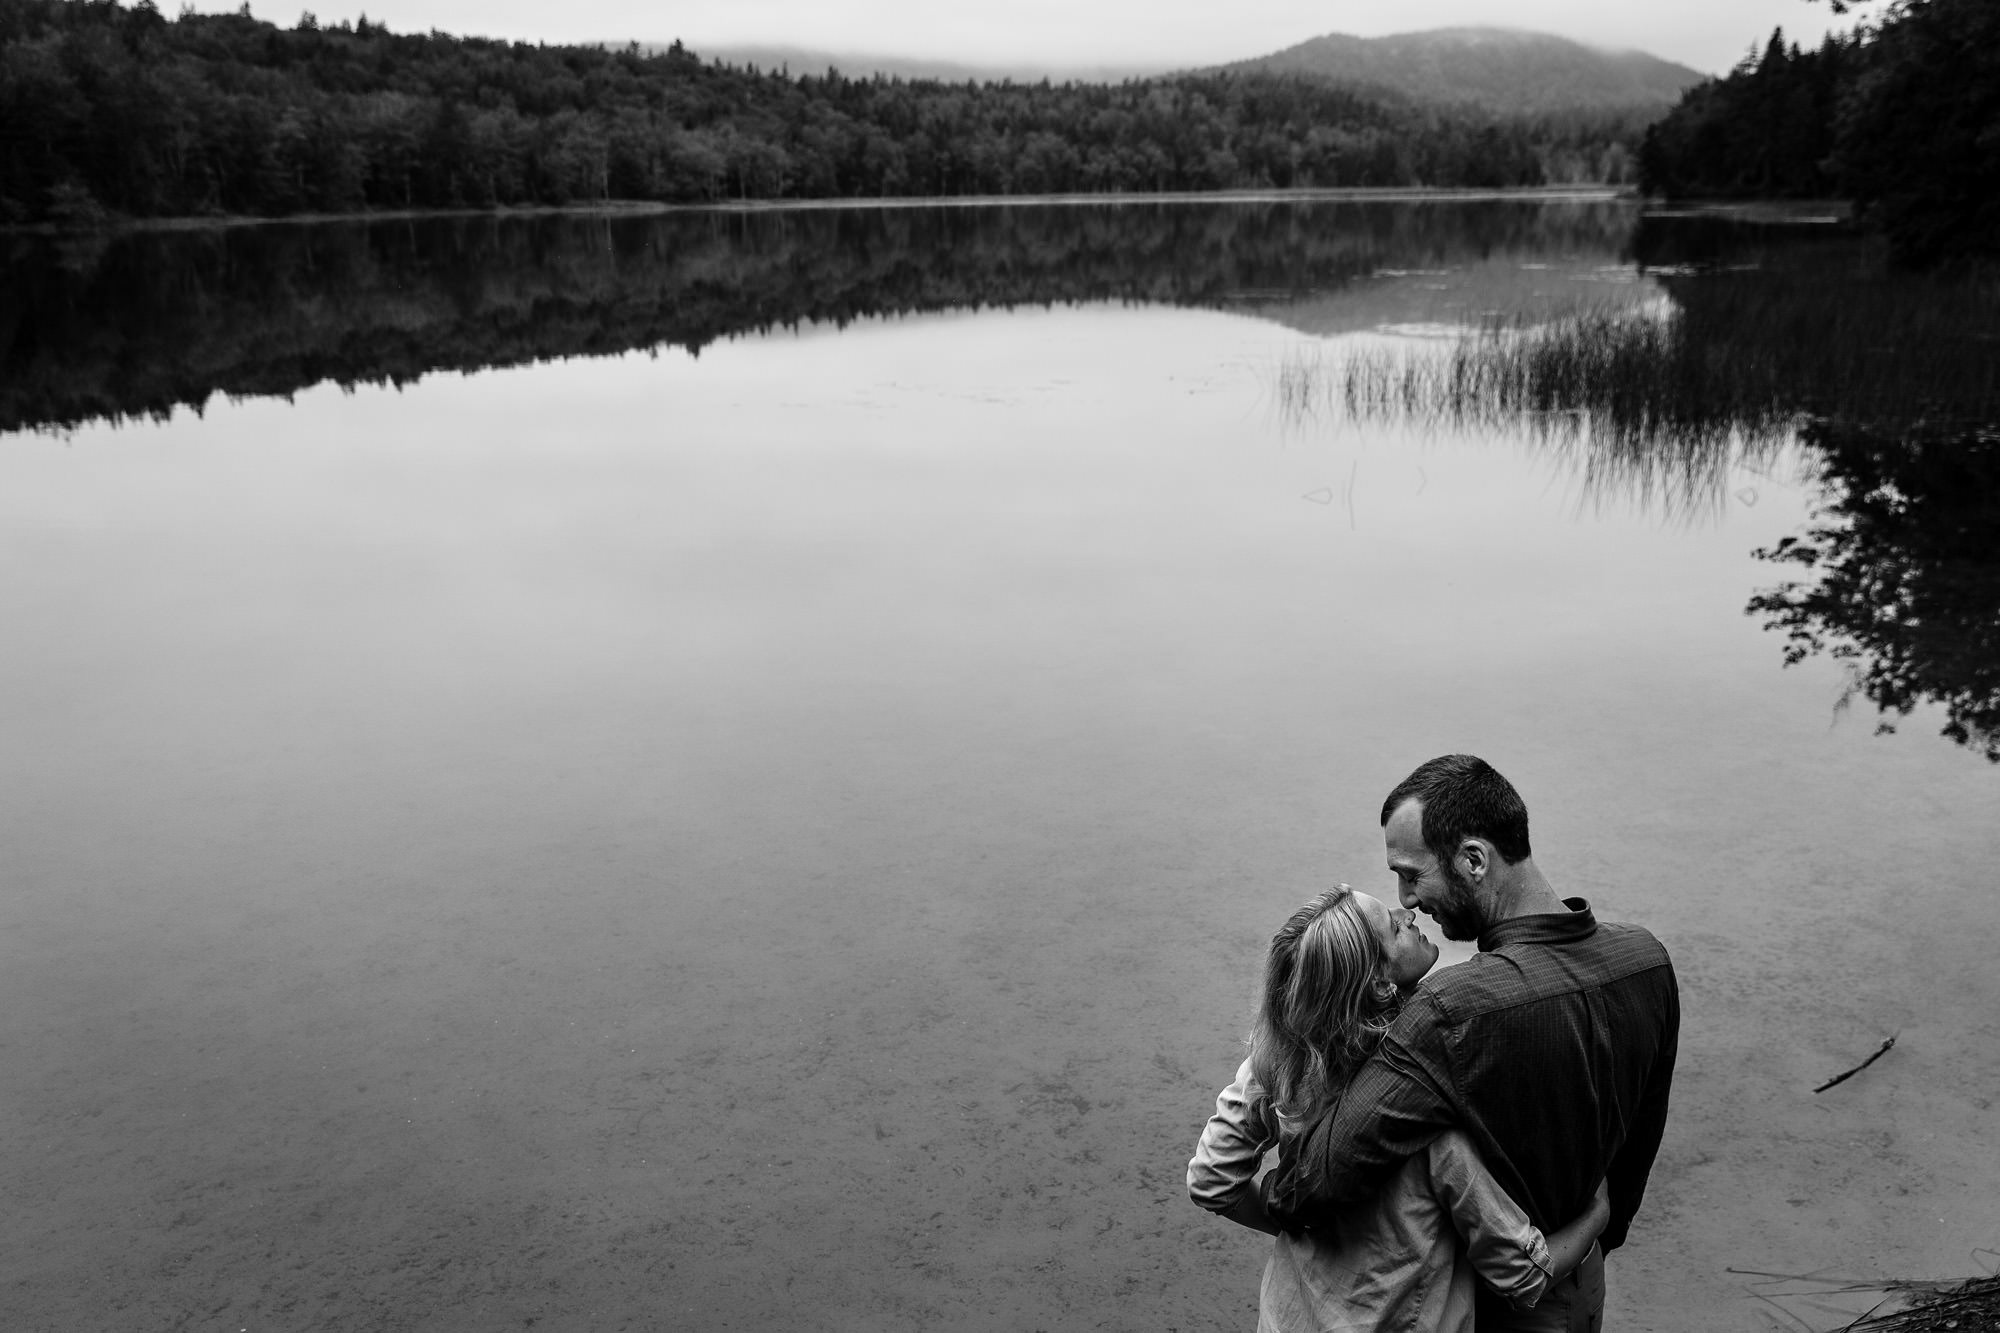 Engagement portraits taken at Little Long Pond in Northeast Harbor, Maine